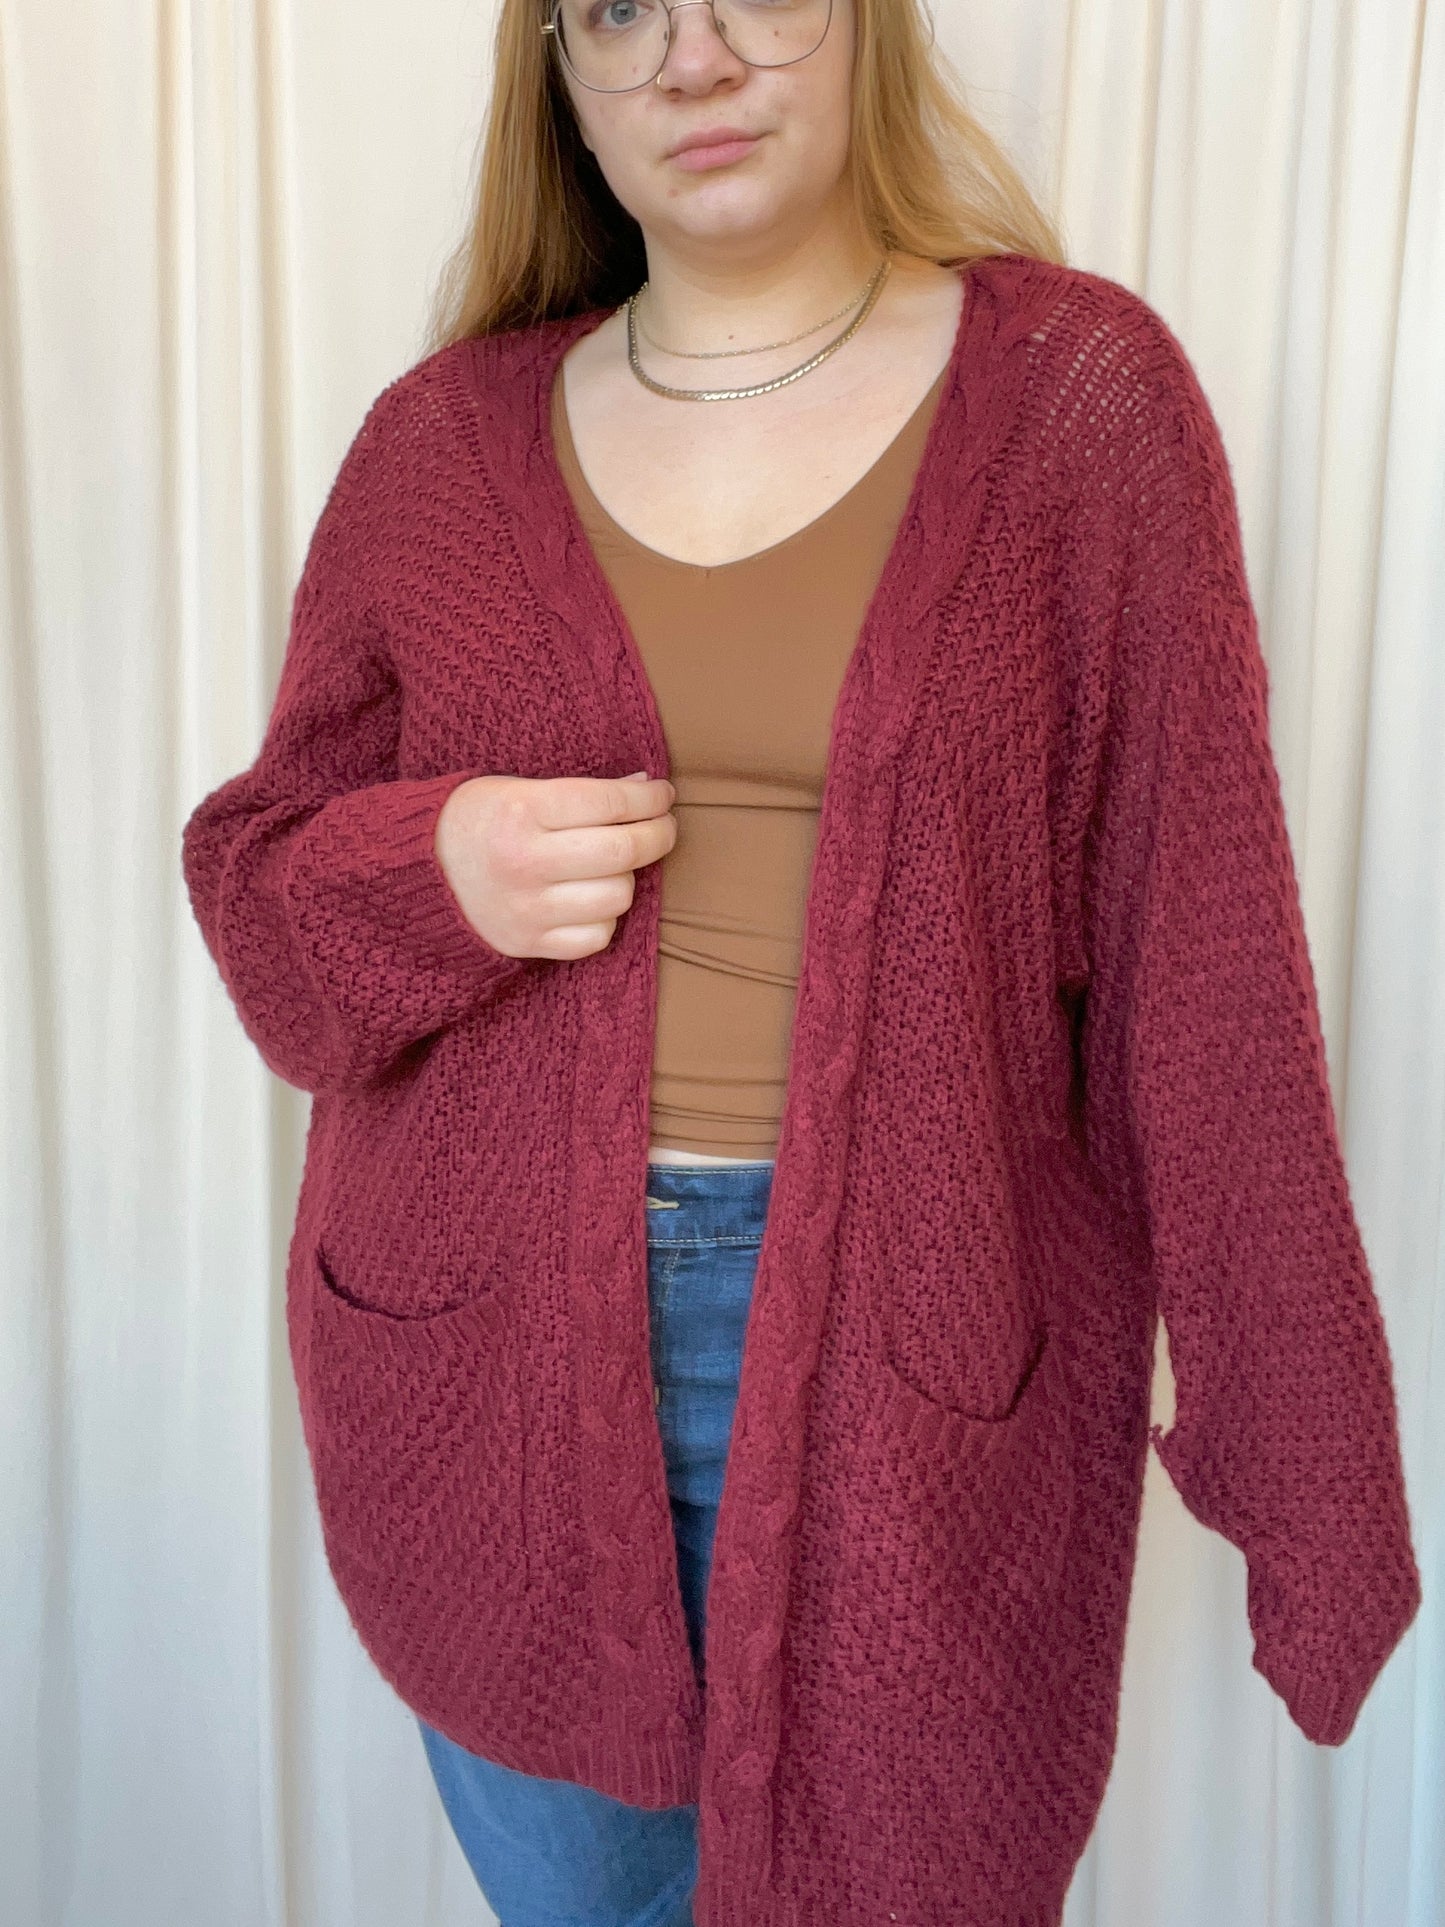 Red Cable Knit Cardigan - 1X-Large